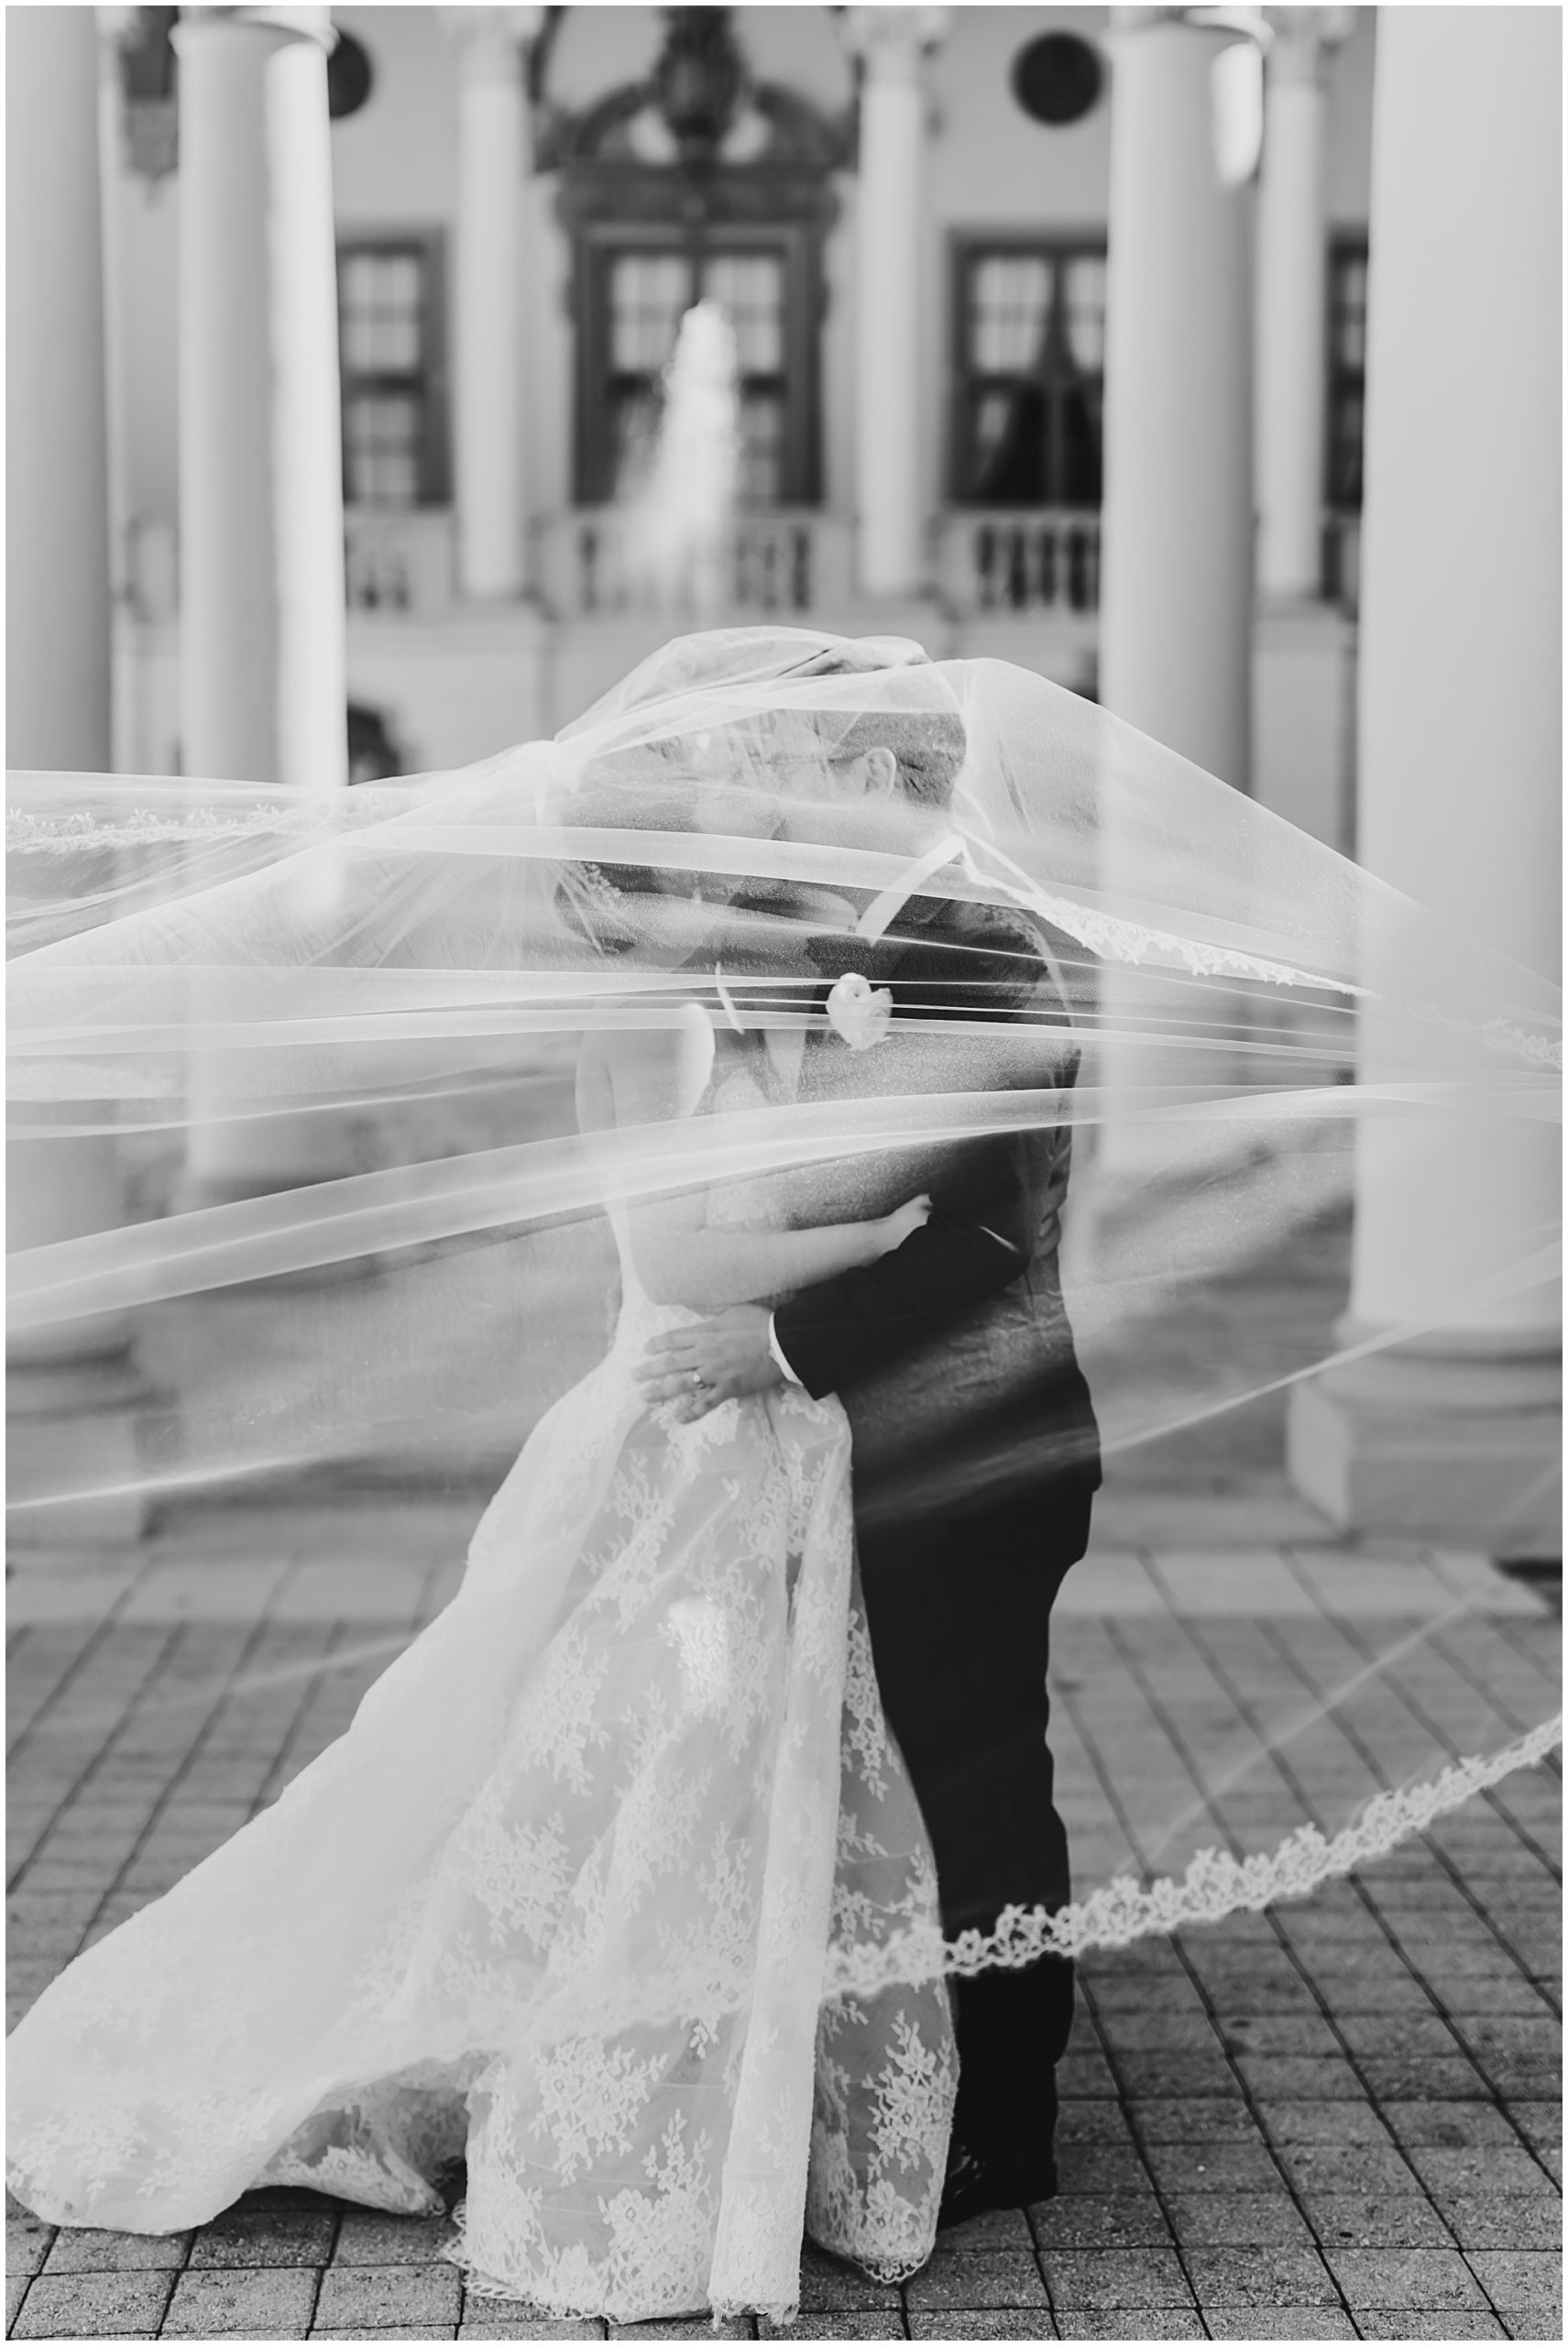 Creative vail shot of the bride and groom at the Biltmore Hotel in coral gables.